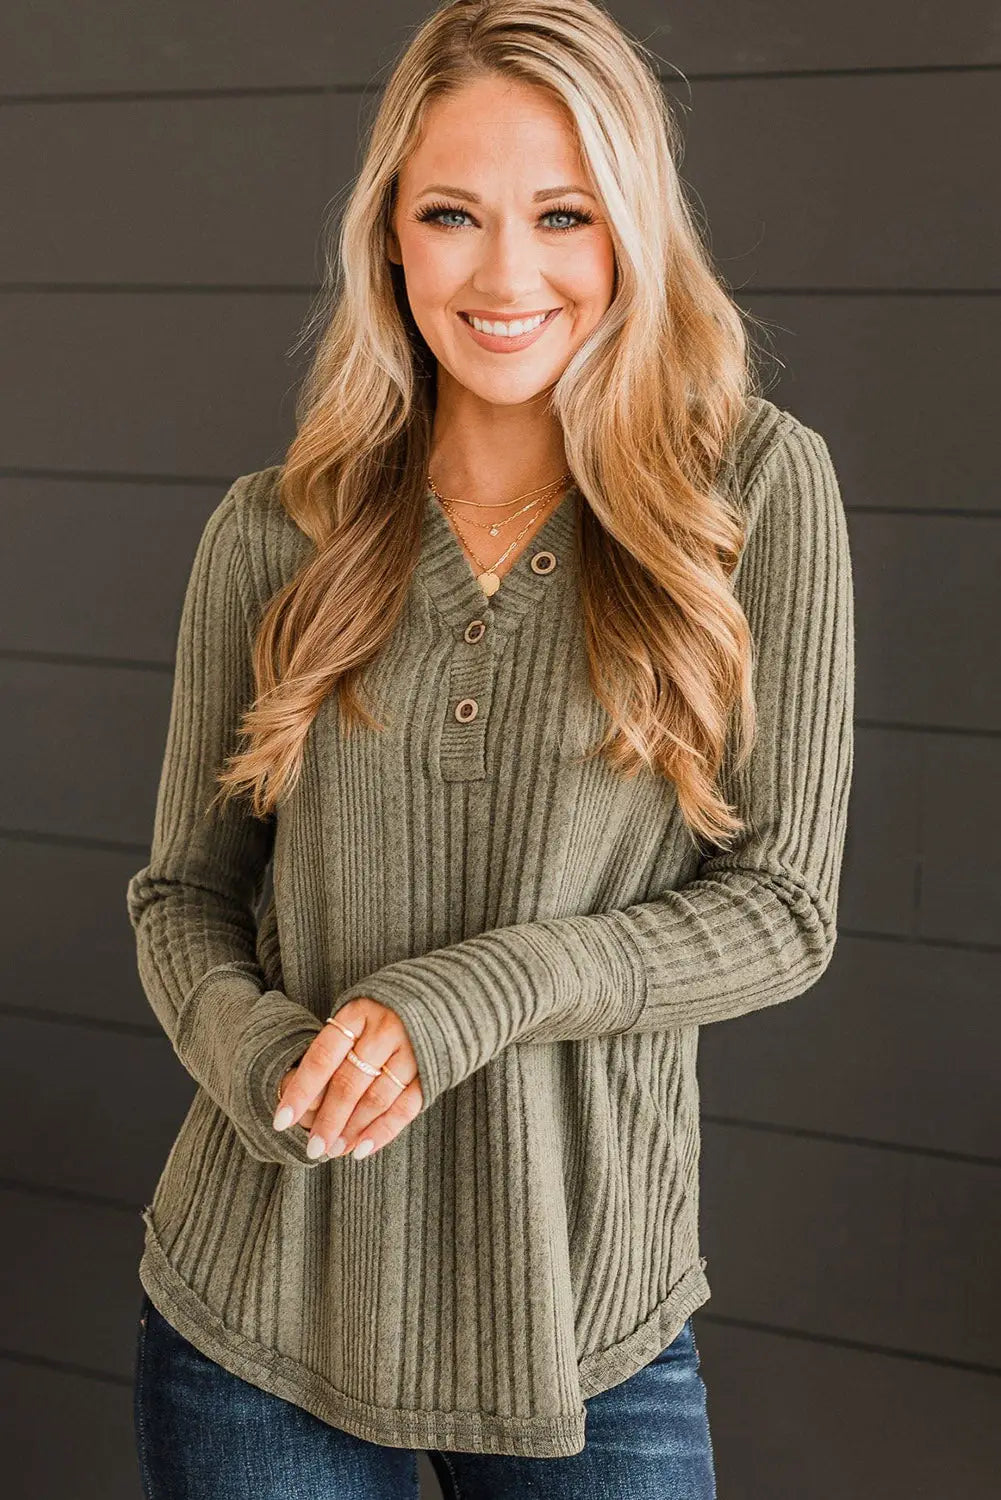 Black v neck buttoned ribbed knit top - long sleeve tops